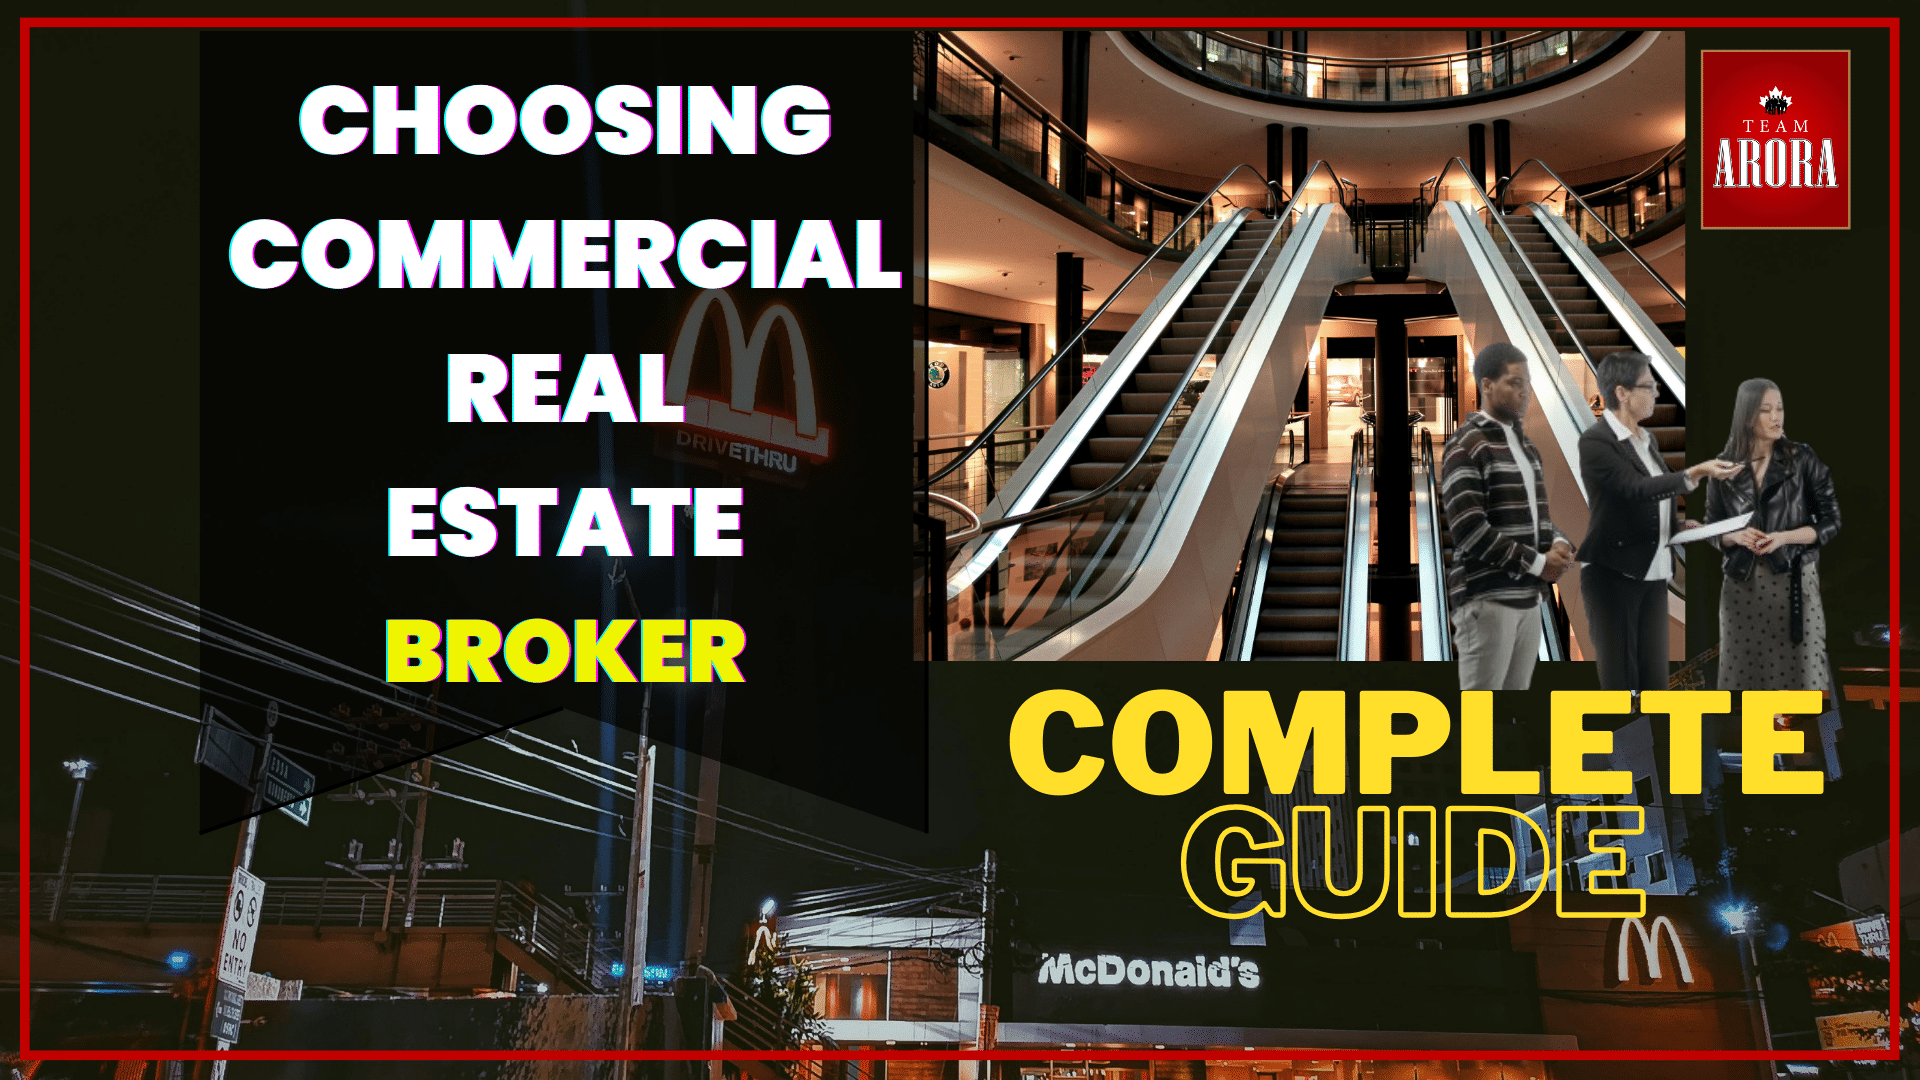 Guide to Choosing a Commercial Real Estate Broker